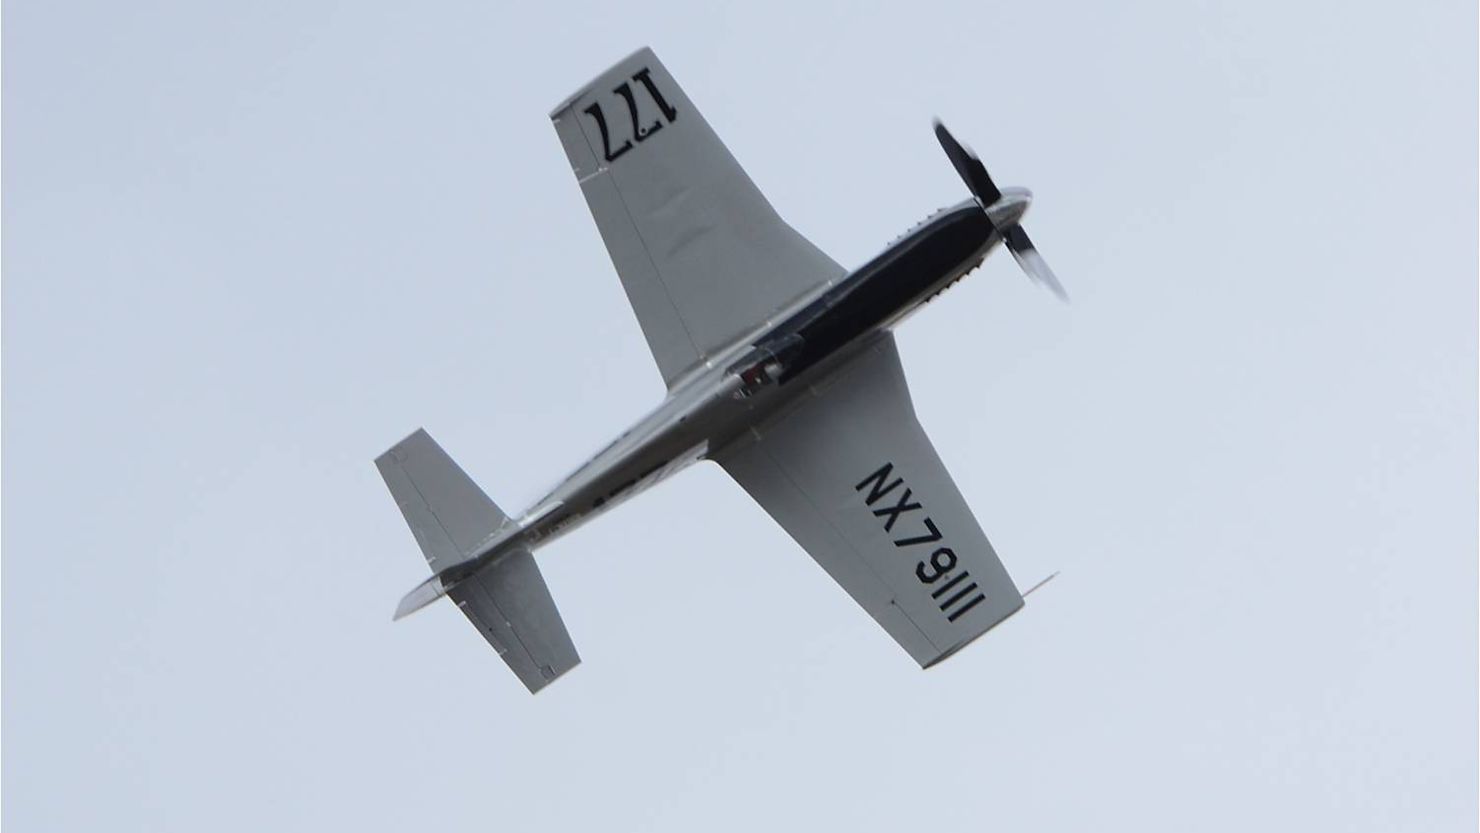 This modified 1944 P-51 Mustang crashed into spectators at the Reno Air Races September 16, 2011. 